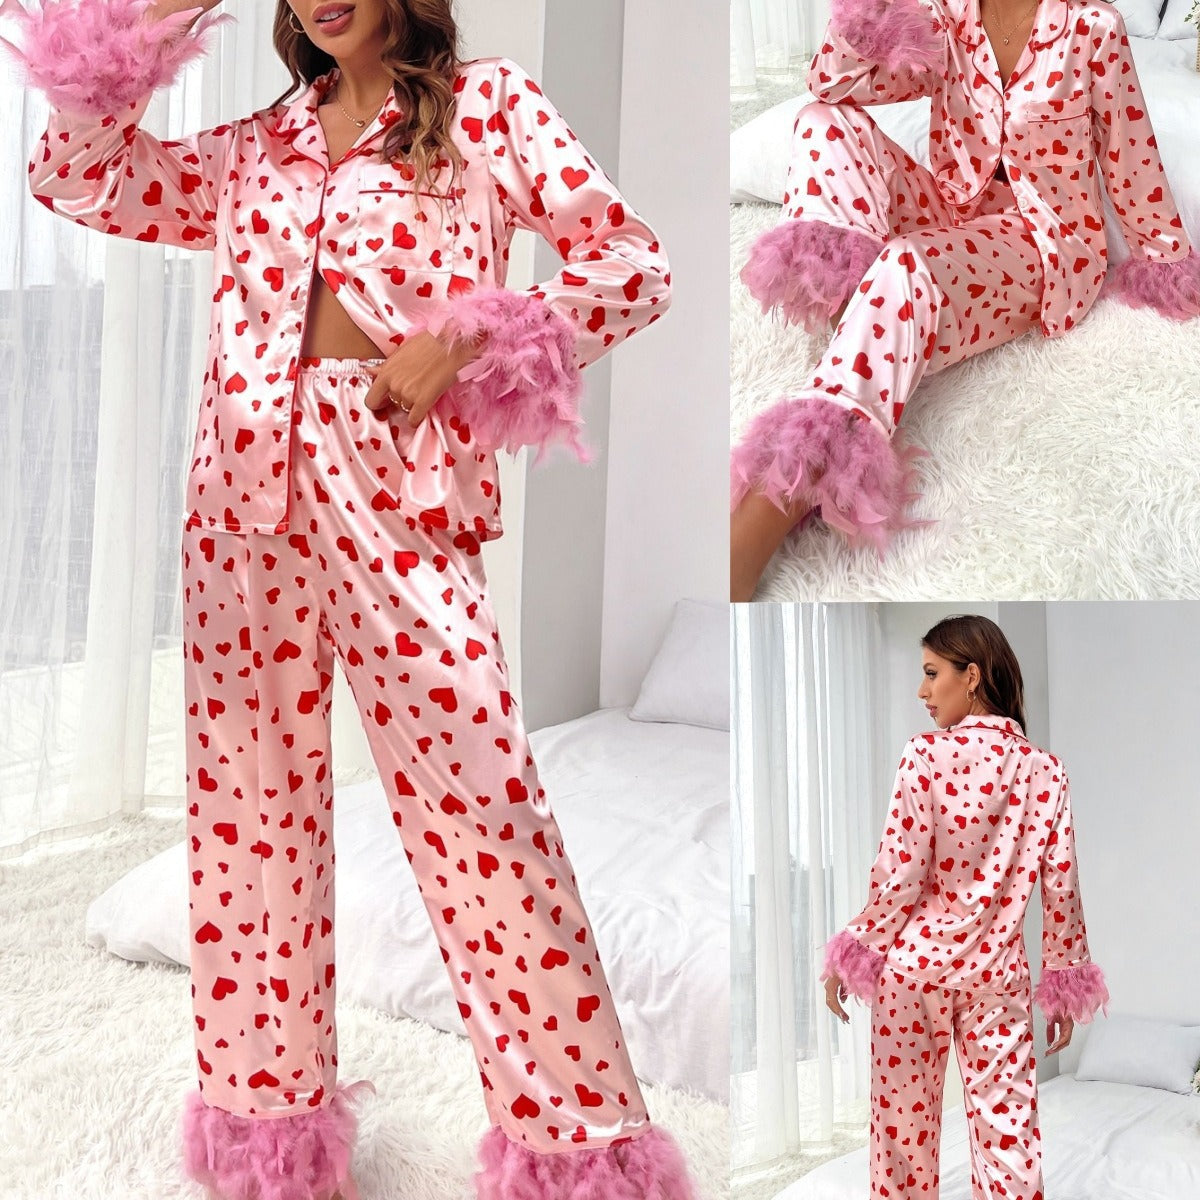 Women's Clothing Valentine's Day Sweet Loving Heart Printed Casual Suit Pajamas, Valentine's Day decor, Romantic home accents, Heart-themed decorations, Cupid-inspired ornaments, Love-themed party supplies, Red and pink decor, Valentine's Day table settings, Romantic ambiance accessories, Heart-shaped embellishments, Valentine's Day home embellishments